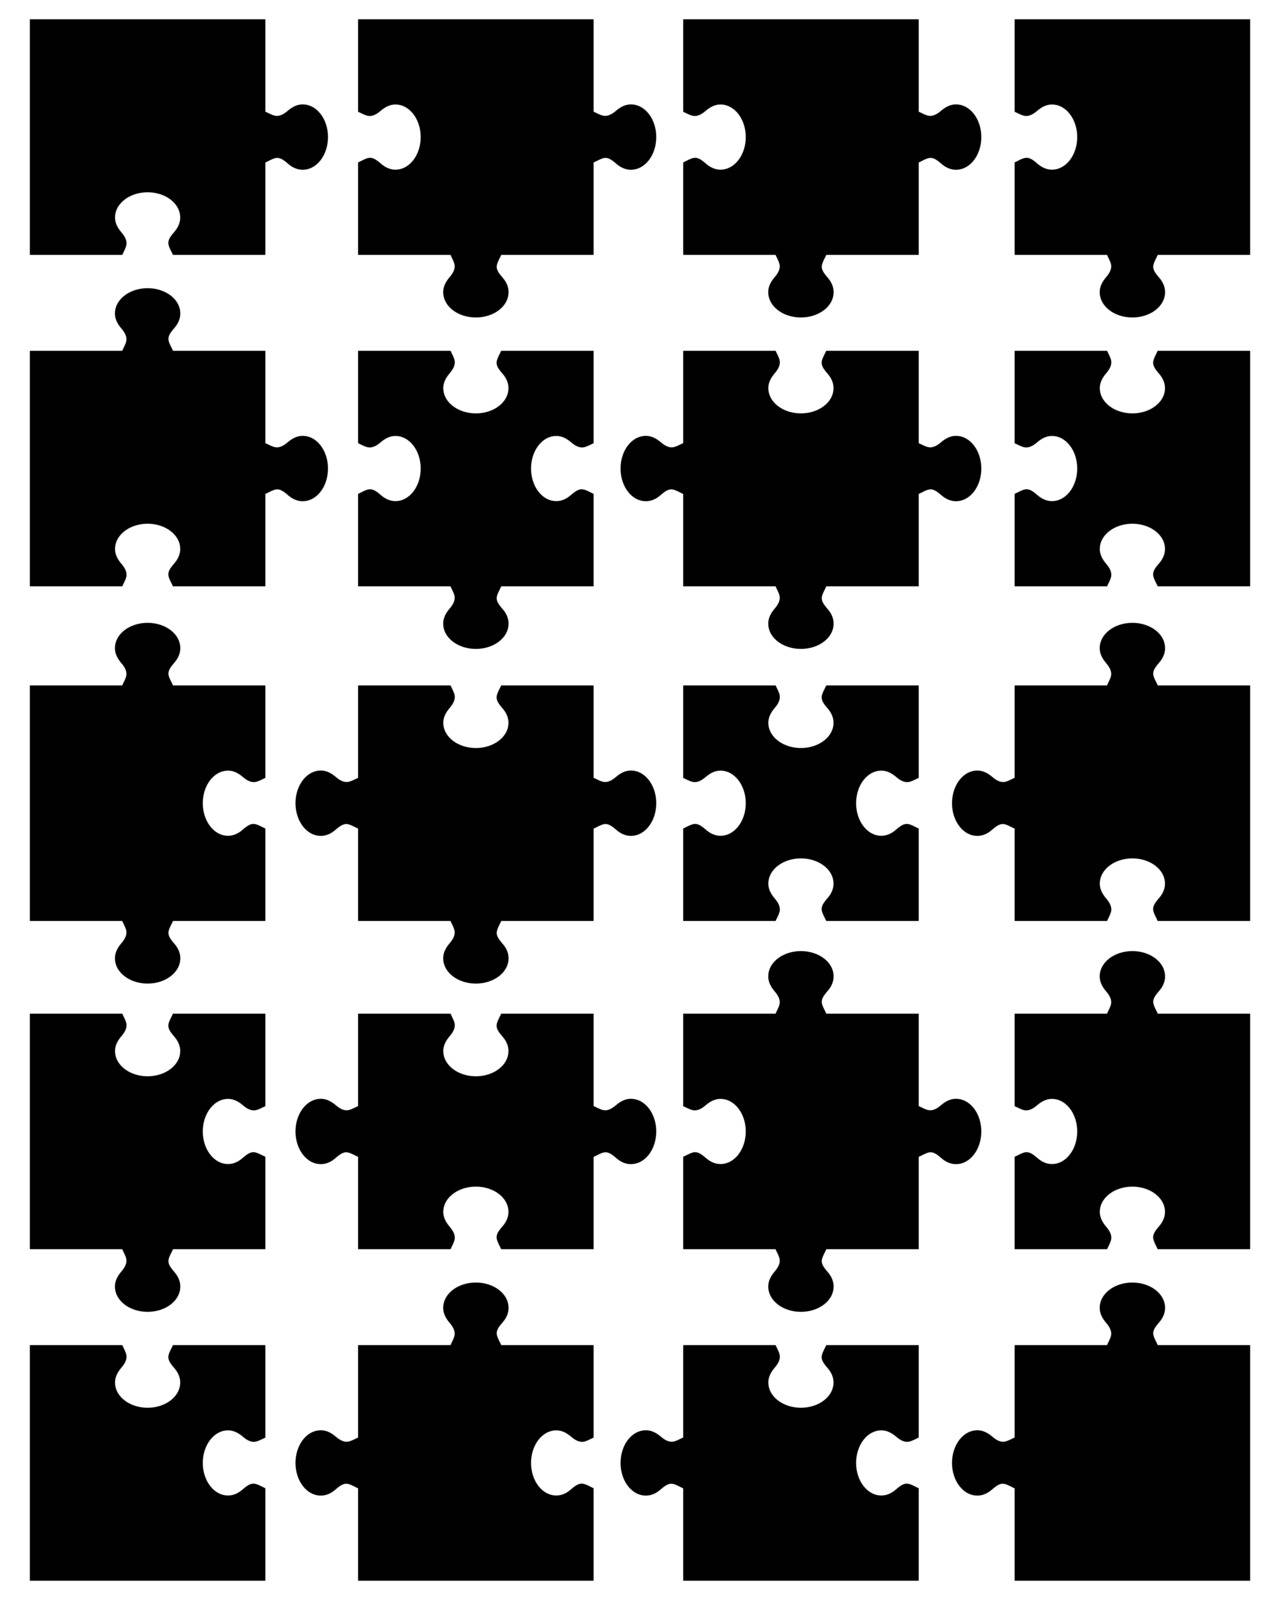 Vector illustration of black puzzle, separate parts